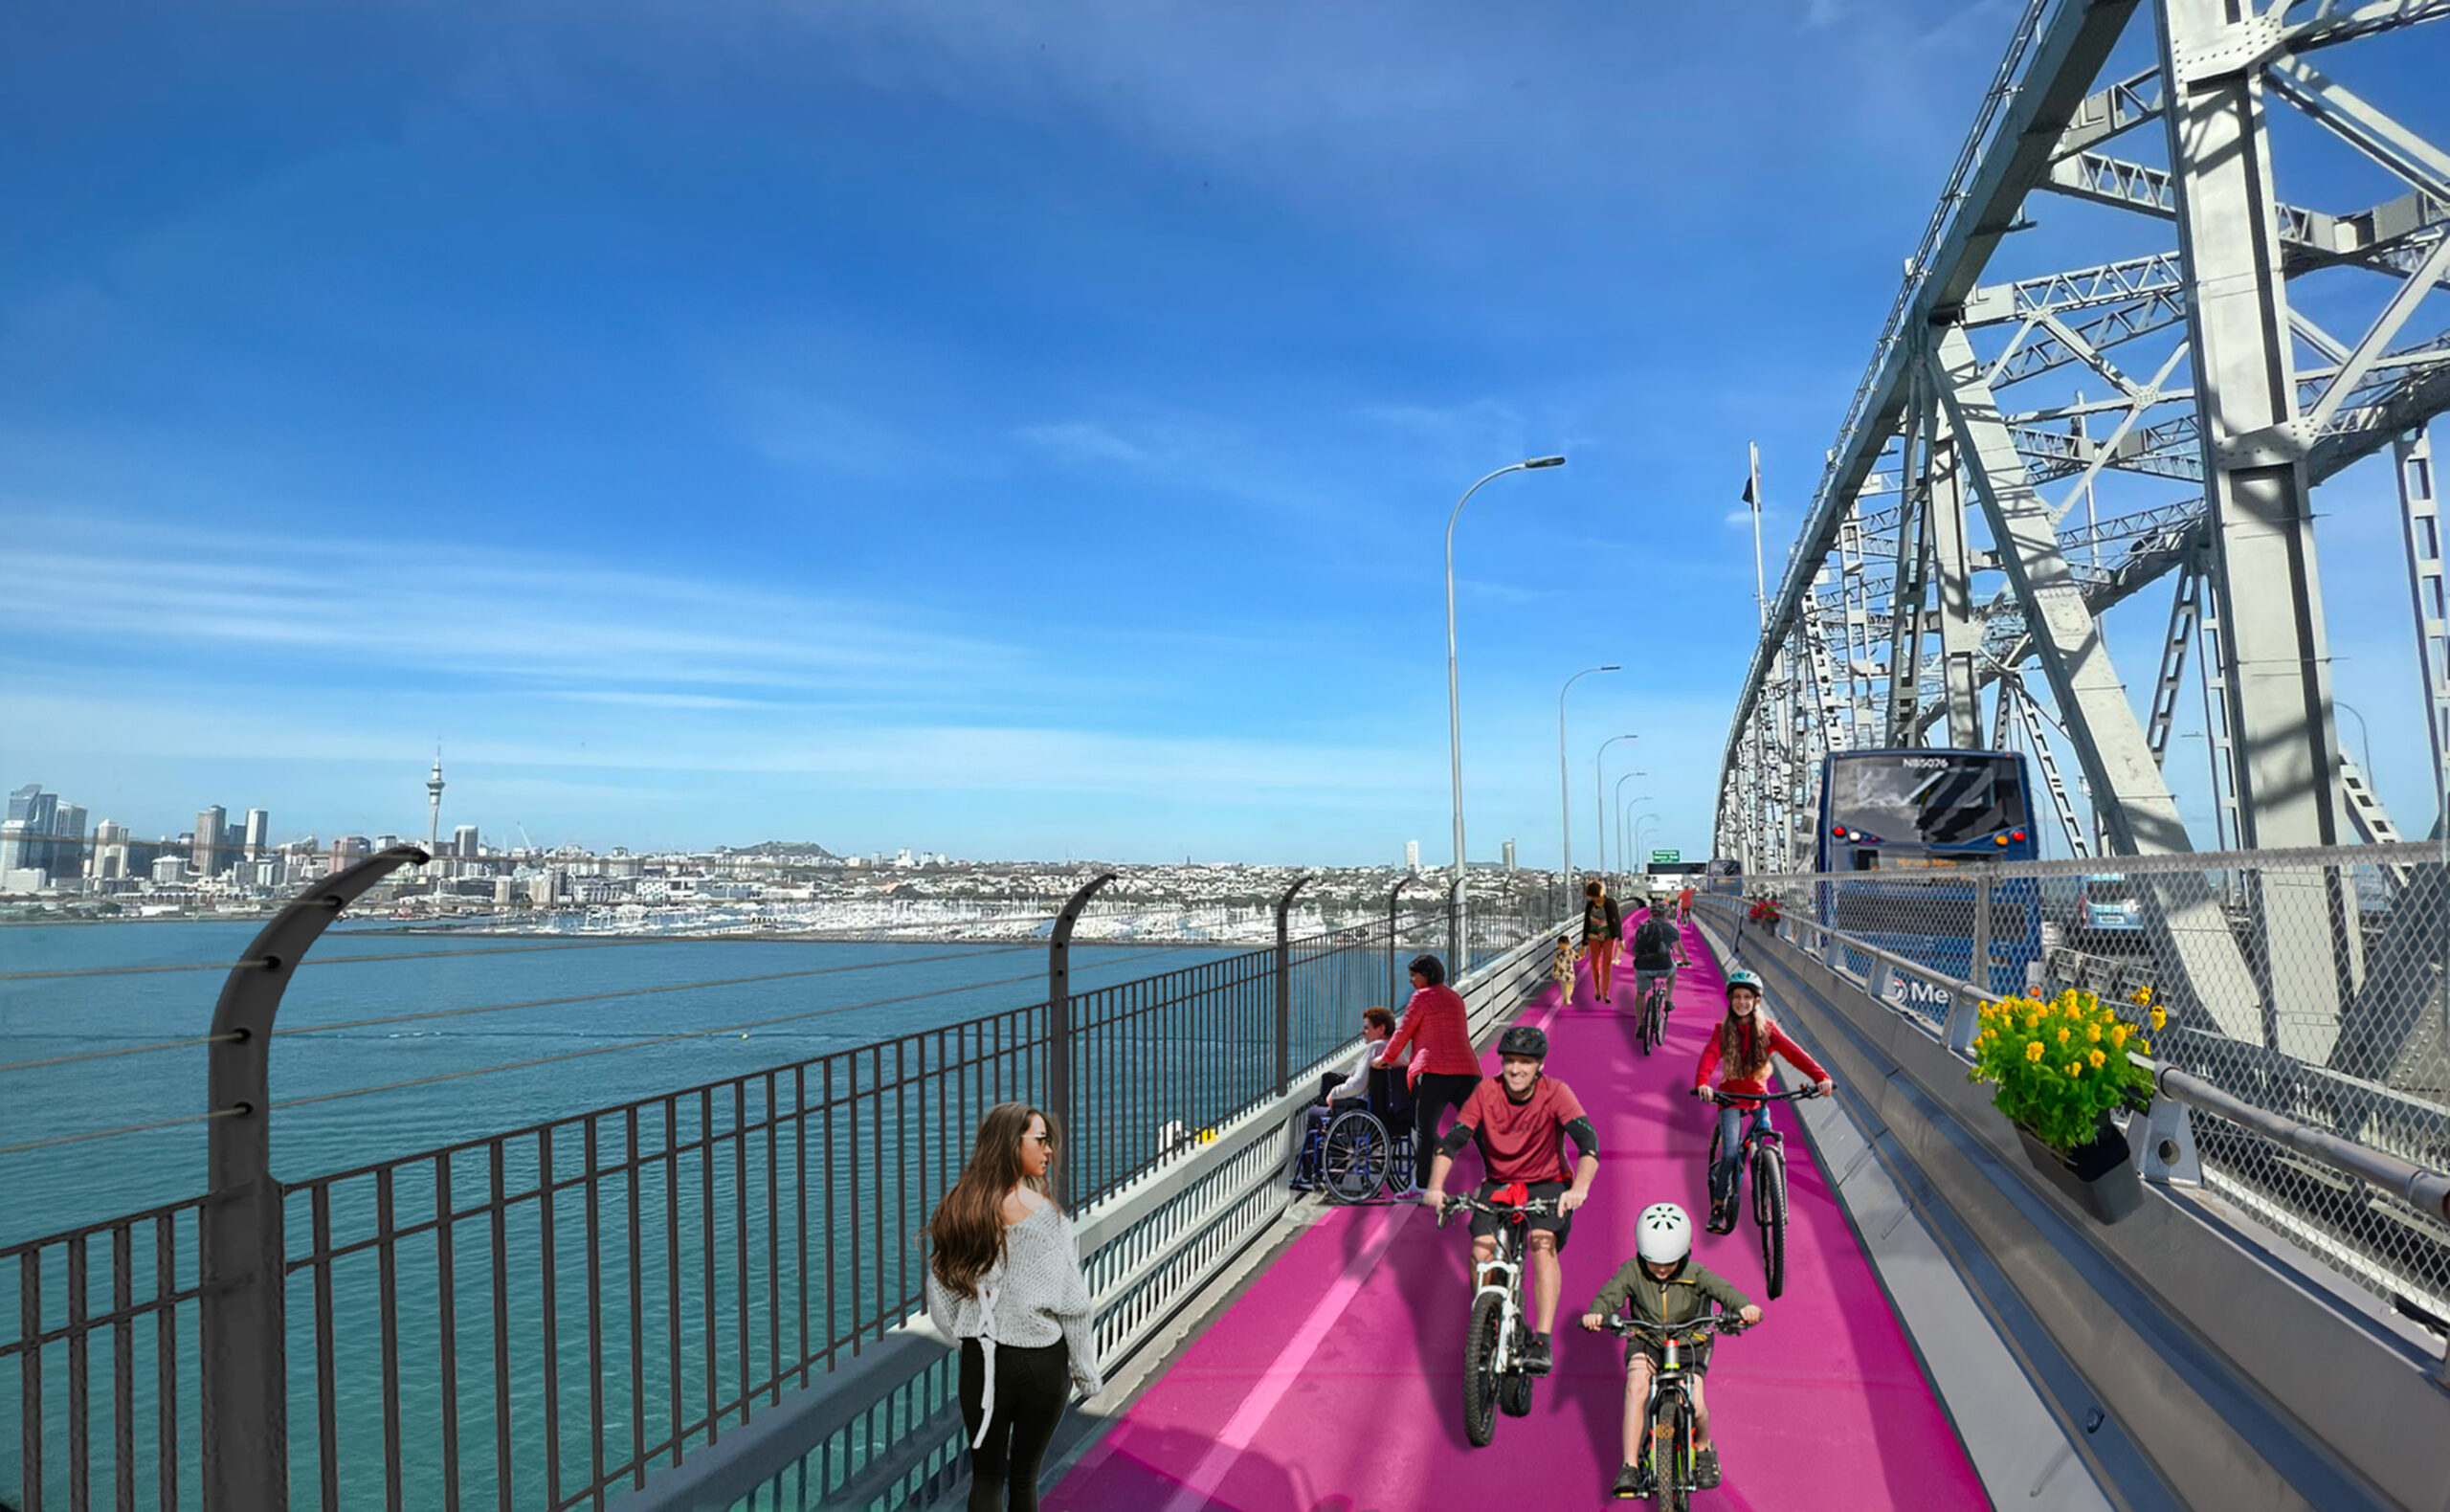 An edited photo showing what a shared path over the Harbour could look like